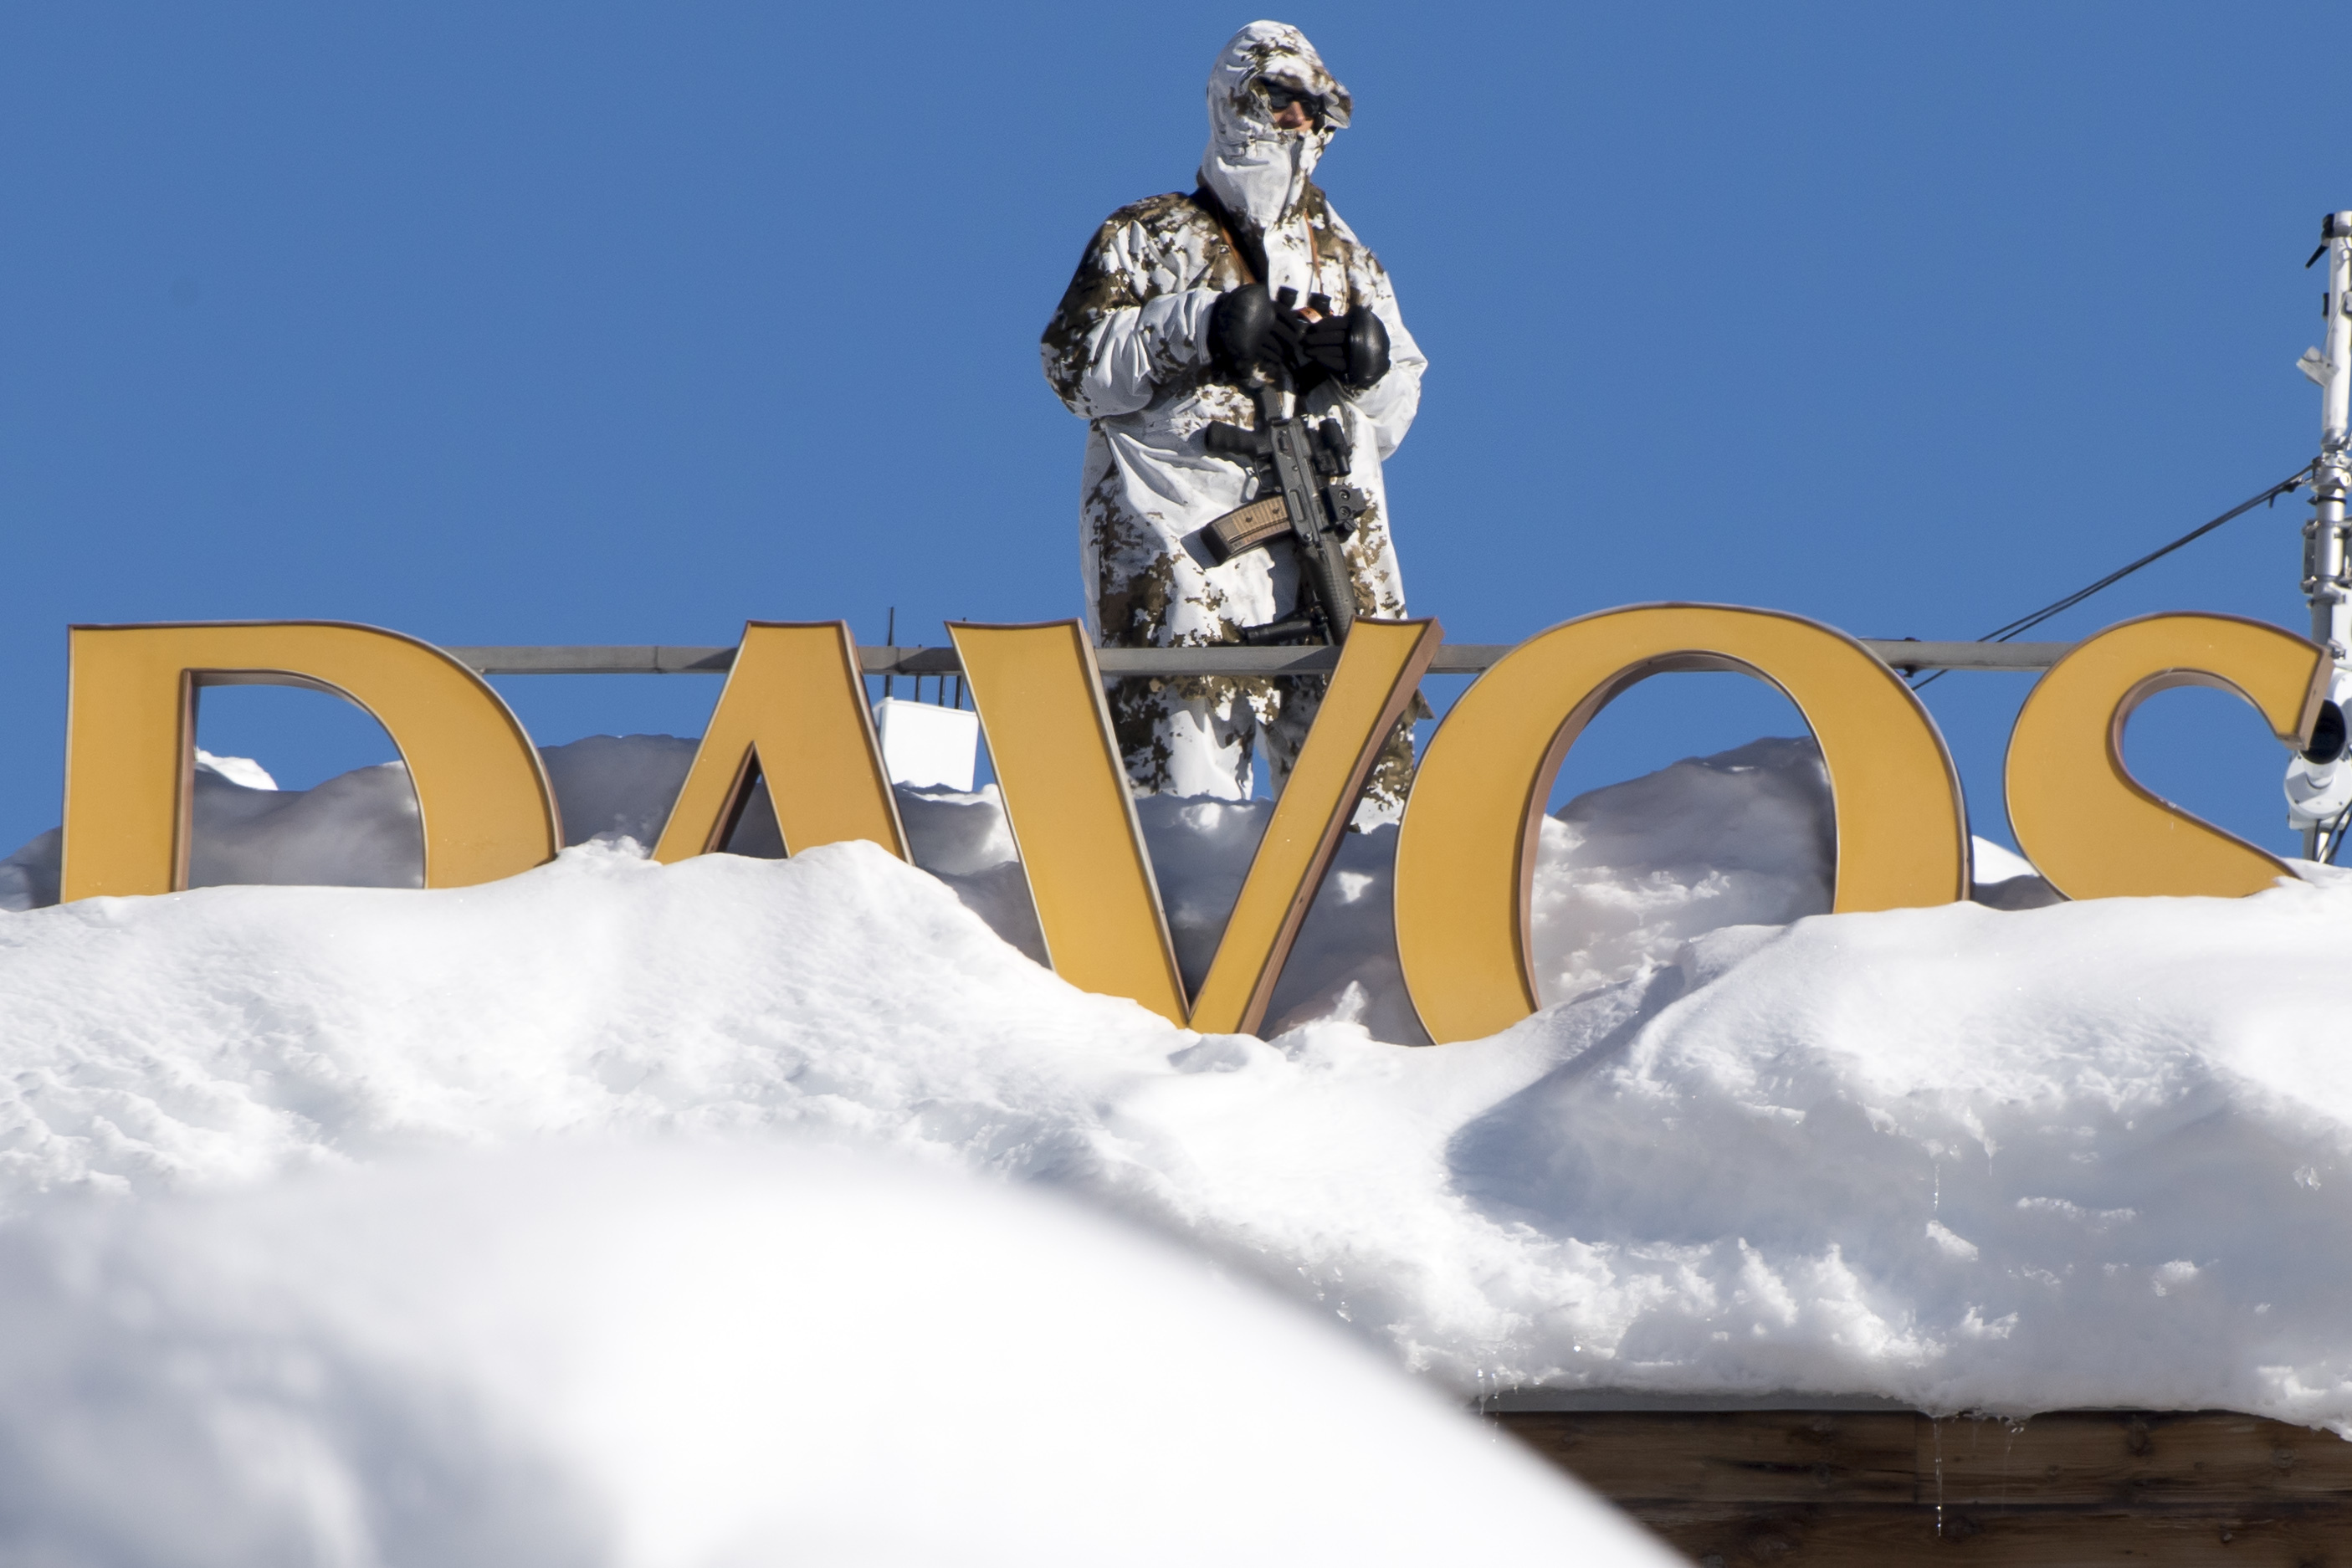 Member of Swiss special police forces stand on the roof of the Kongress Hotel next to the Congress Center the first day of the 49th Annual Meeting of the World Economic Forum, WEF, in Davos, Switzerland, Tuesday, Jan. 22, 2019. (Laurent Gillieron/Keystone via AP)